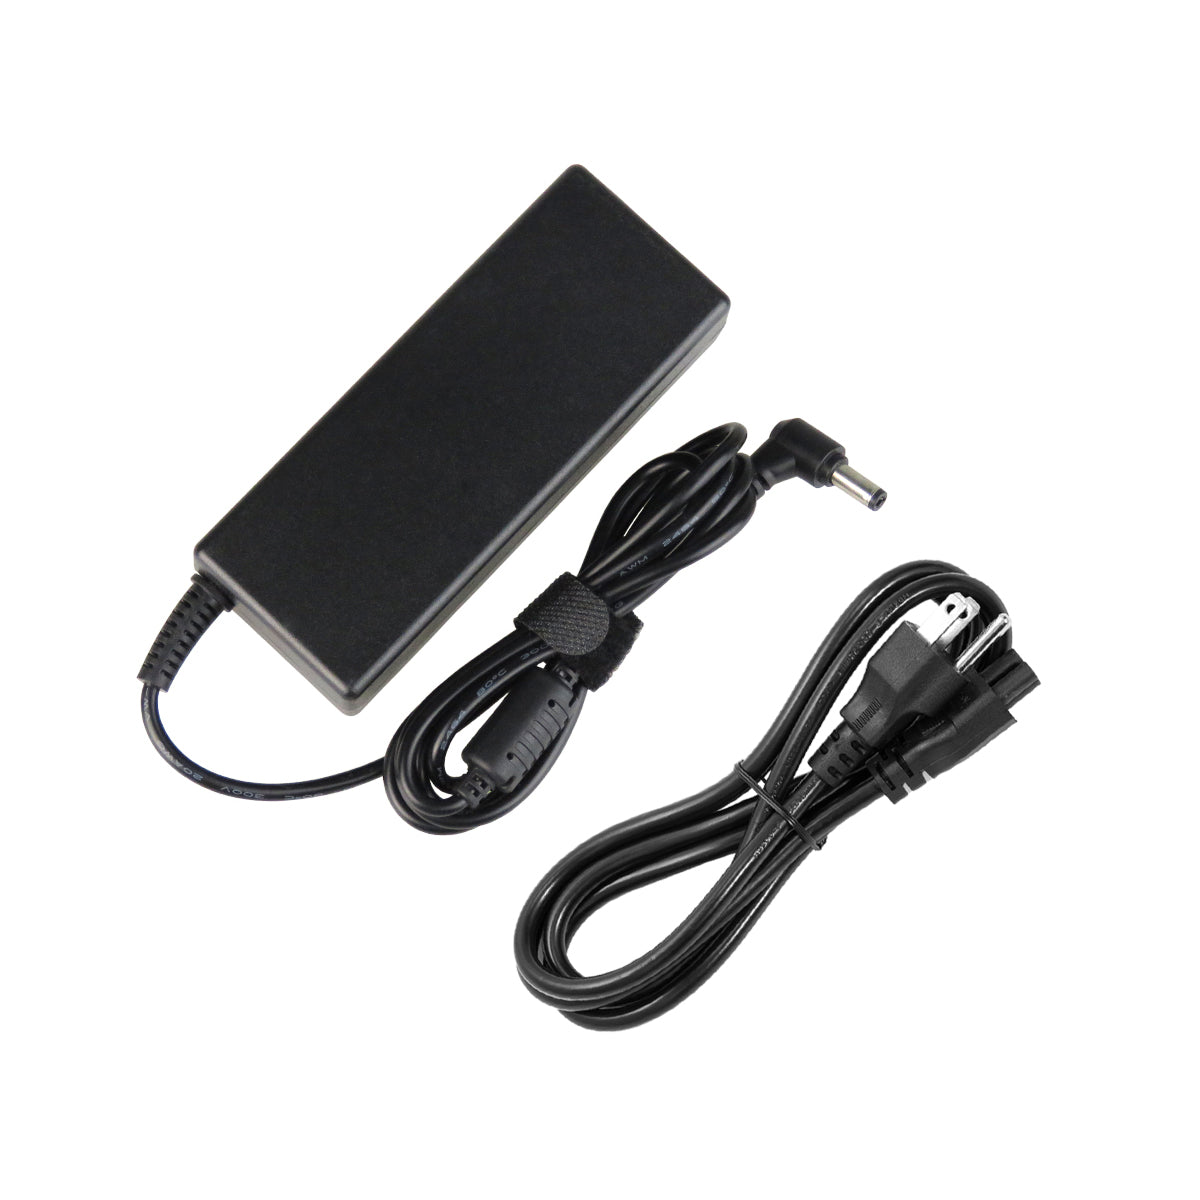 AC Adapter Charger for Gateway M-67 M-6700 Notebook.